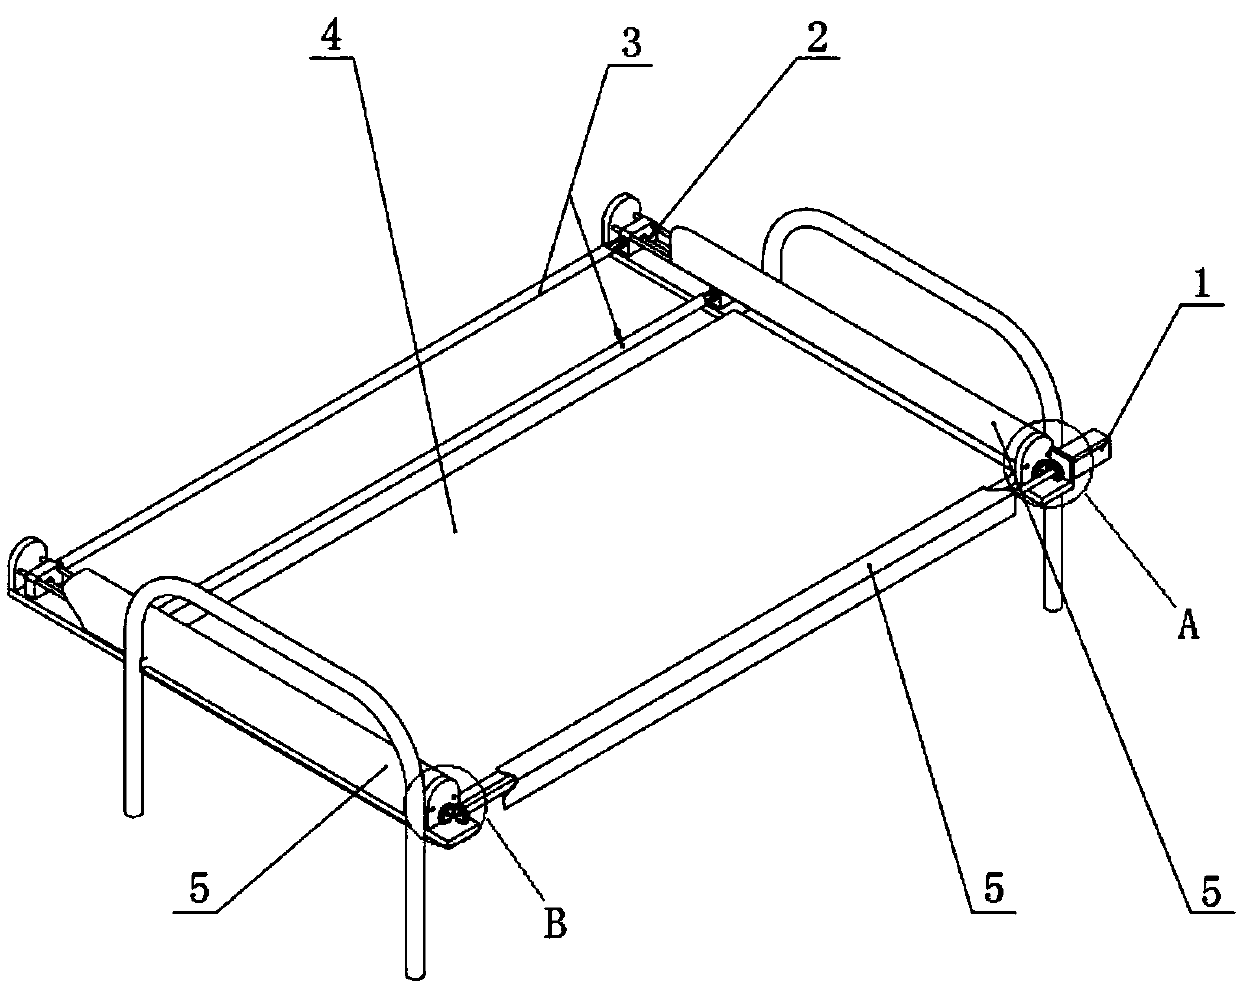 Device for transferring bed patients and replacing bed sheets